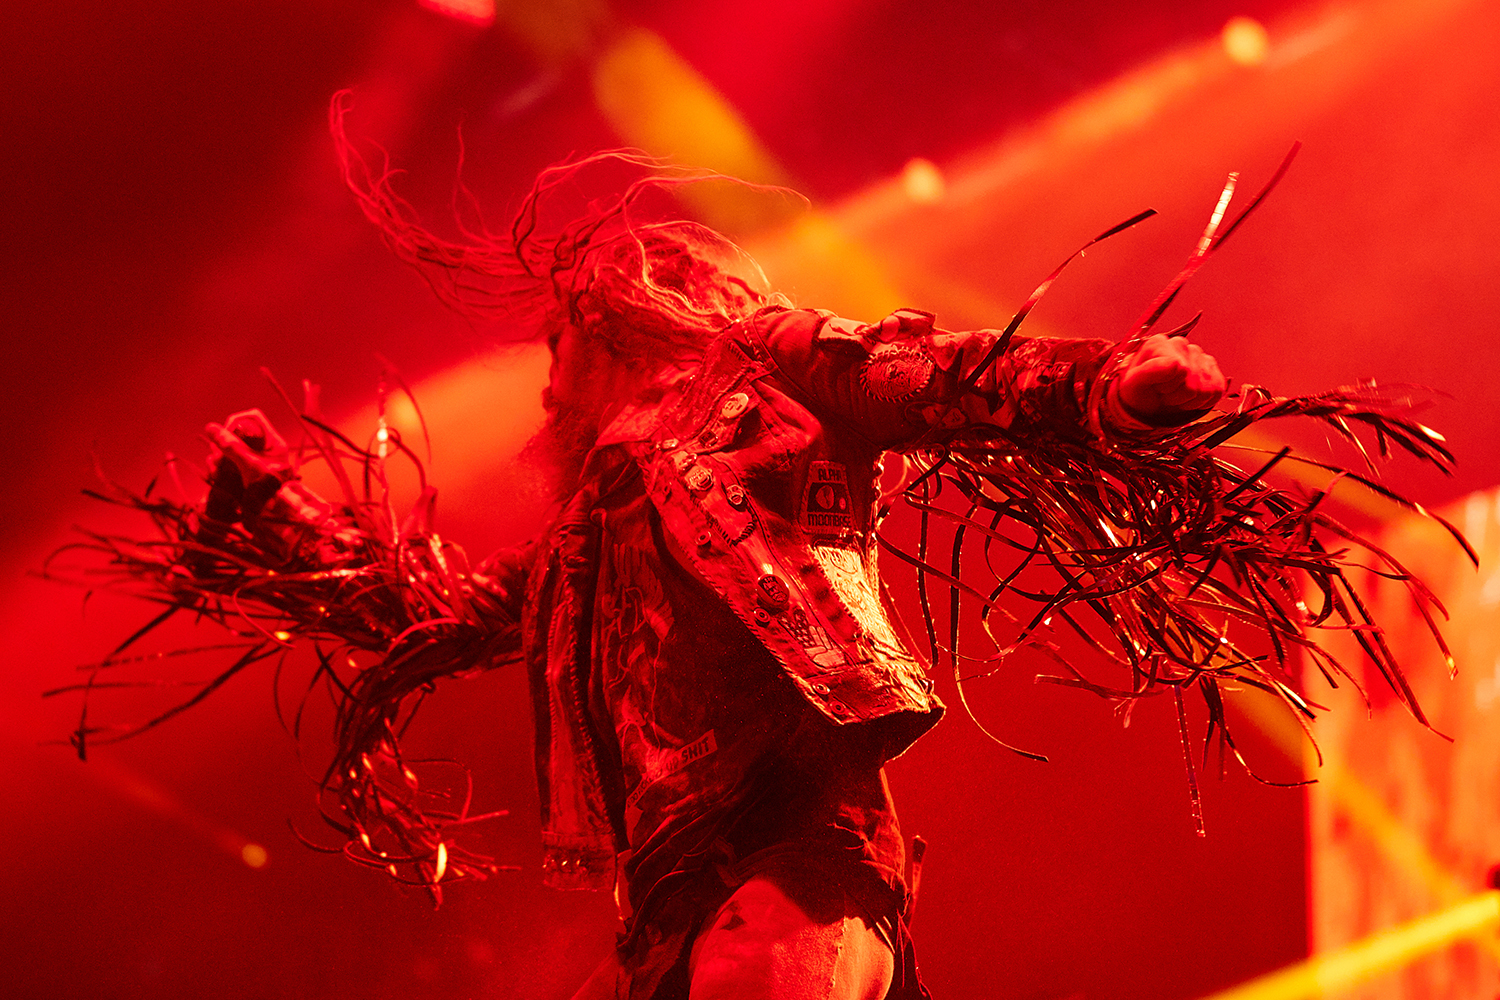  Rob Zombie performs during a concert as part of the Twins of Evil Tour at the US Cellular Center in Cedar Rapids on Saturday, Aug. 10, 2019.  